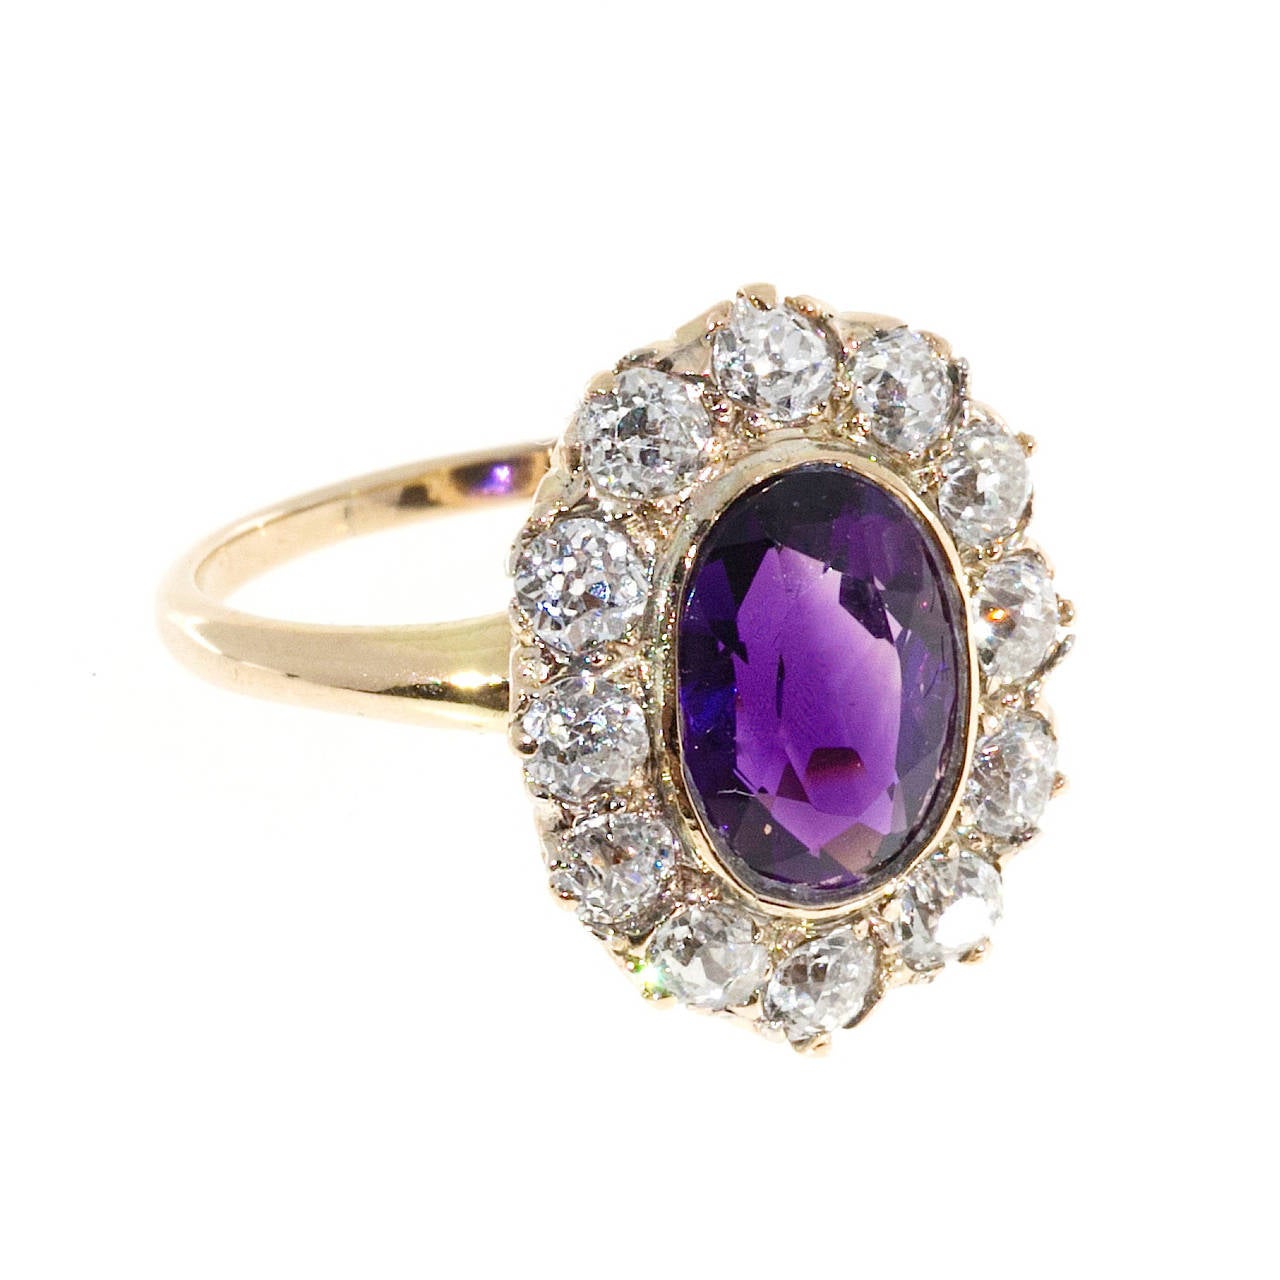 1890's Victorian handmade ring with old mine cut sparkly diamonds surrounding a bright reddish purple gem Amethyst.

1 oval reddish purple natural Amethyst 10 x 7mm, approx. total weight 2.40ct
12 old European cut diamonds, .10ct each, approx.